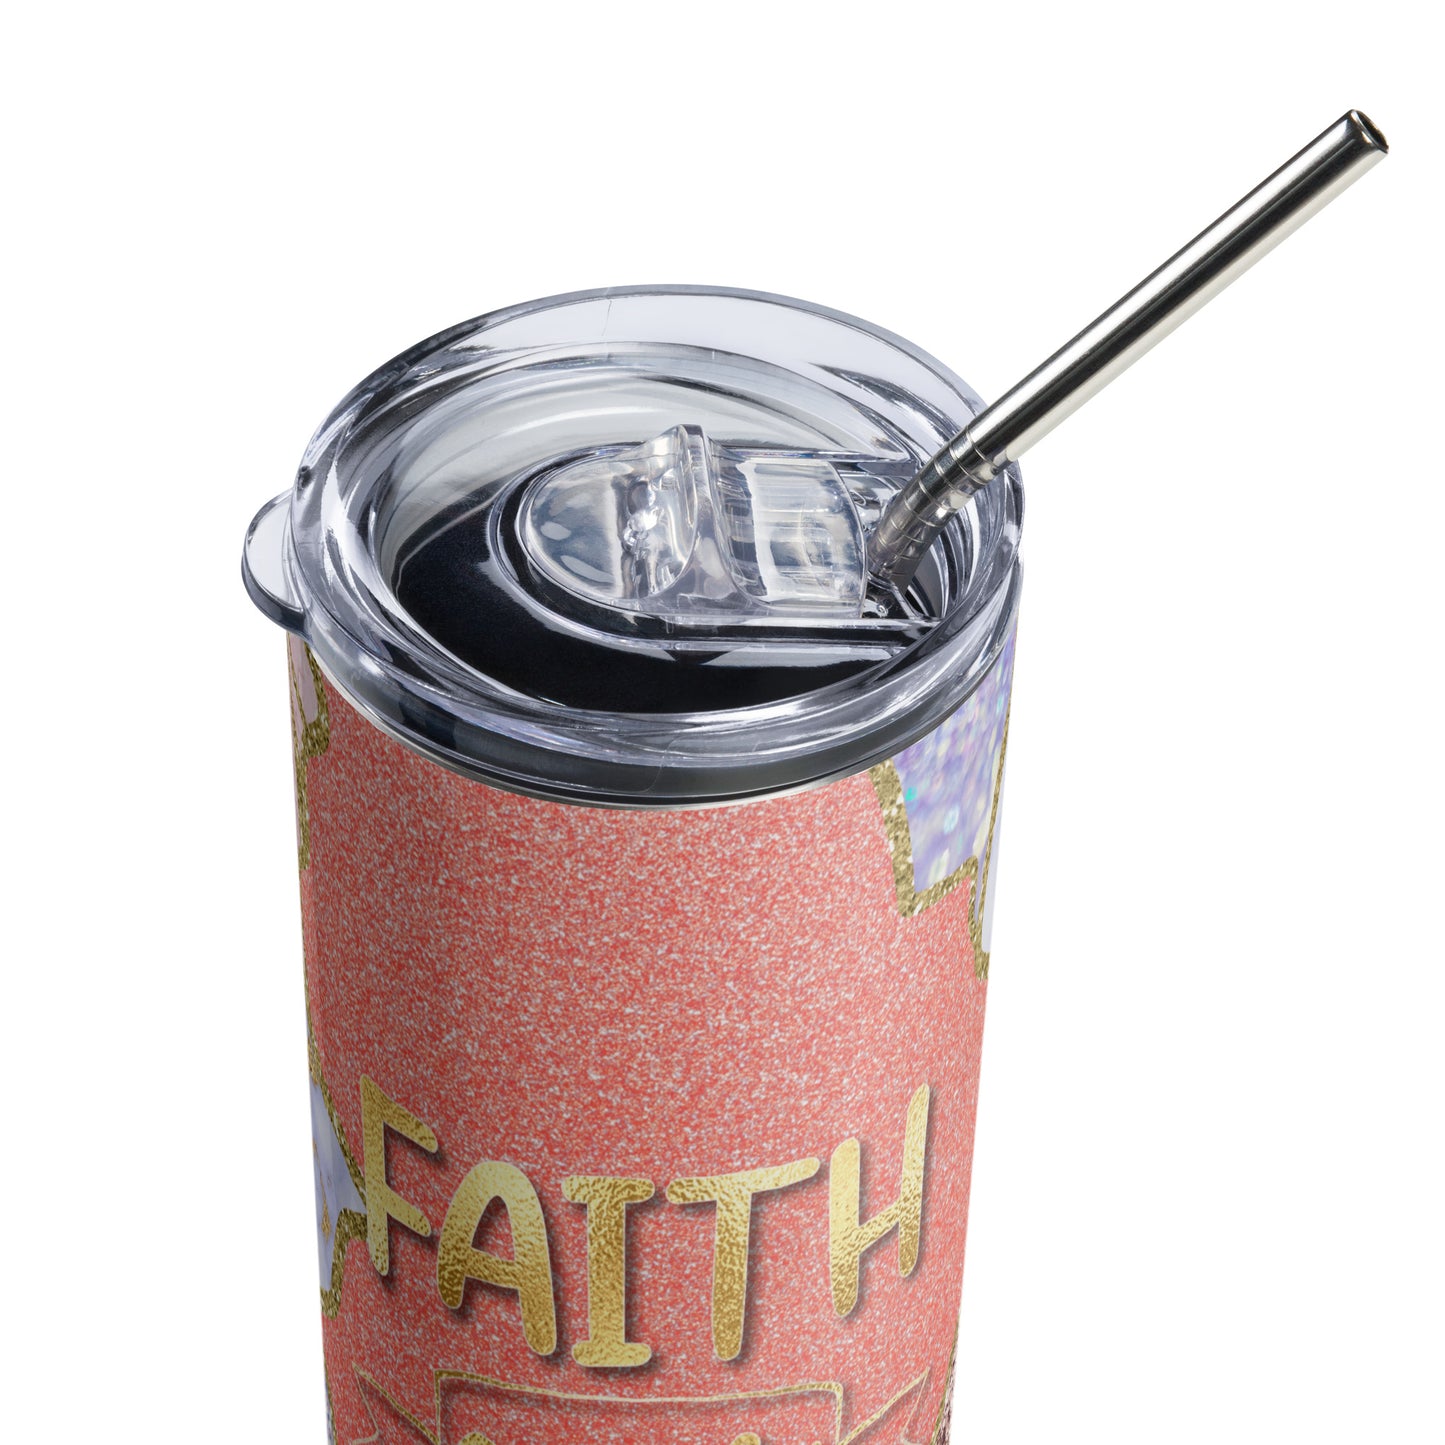 Durable 20oz stainless steel tumbler for faith-inspired beverages